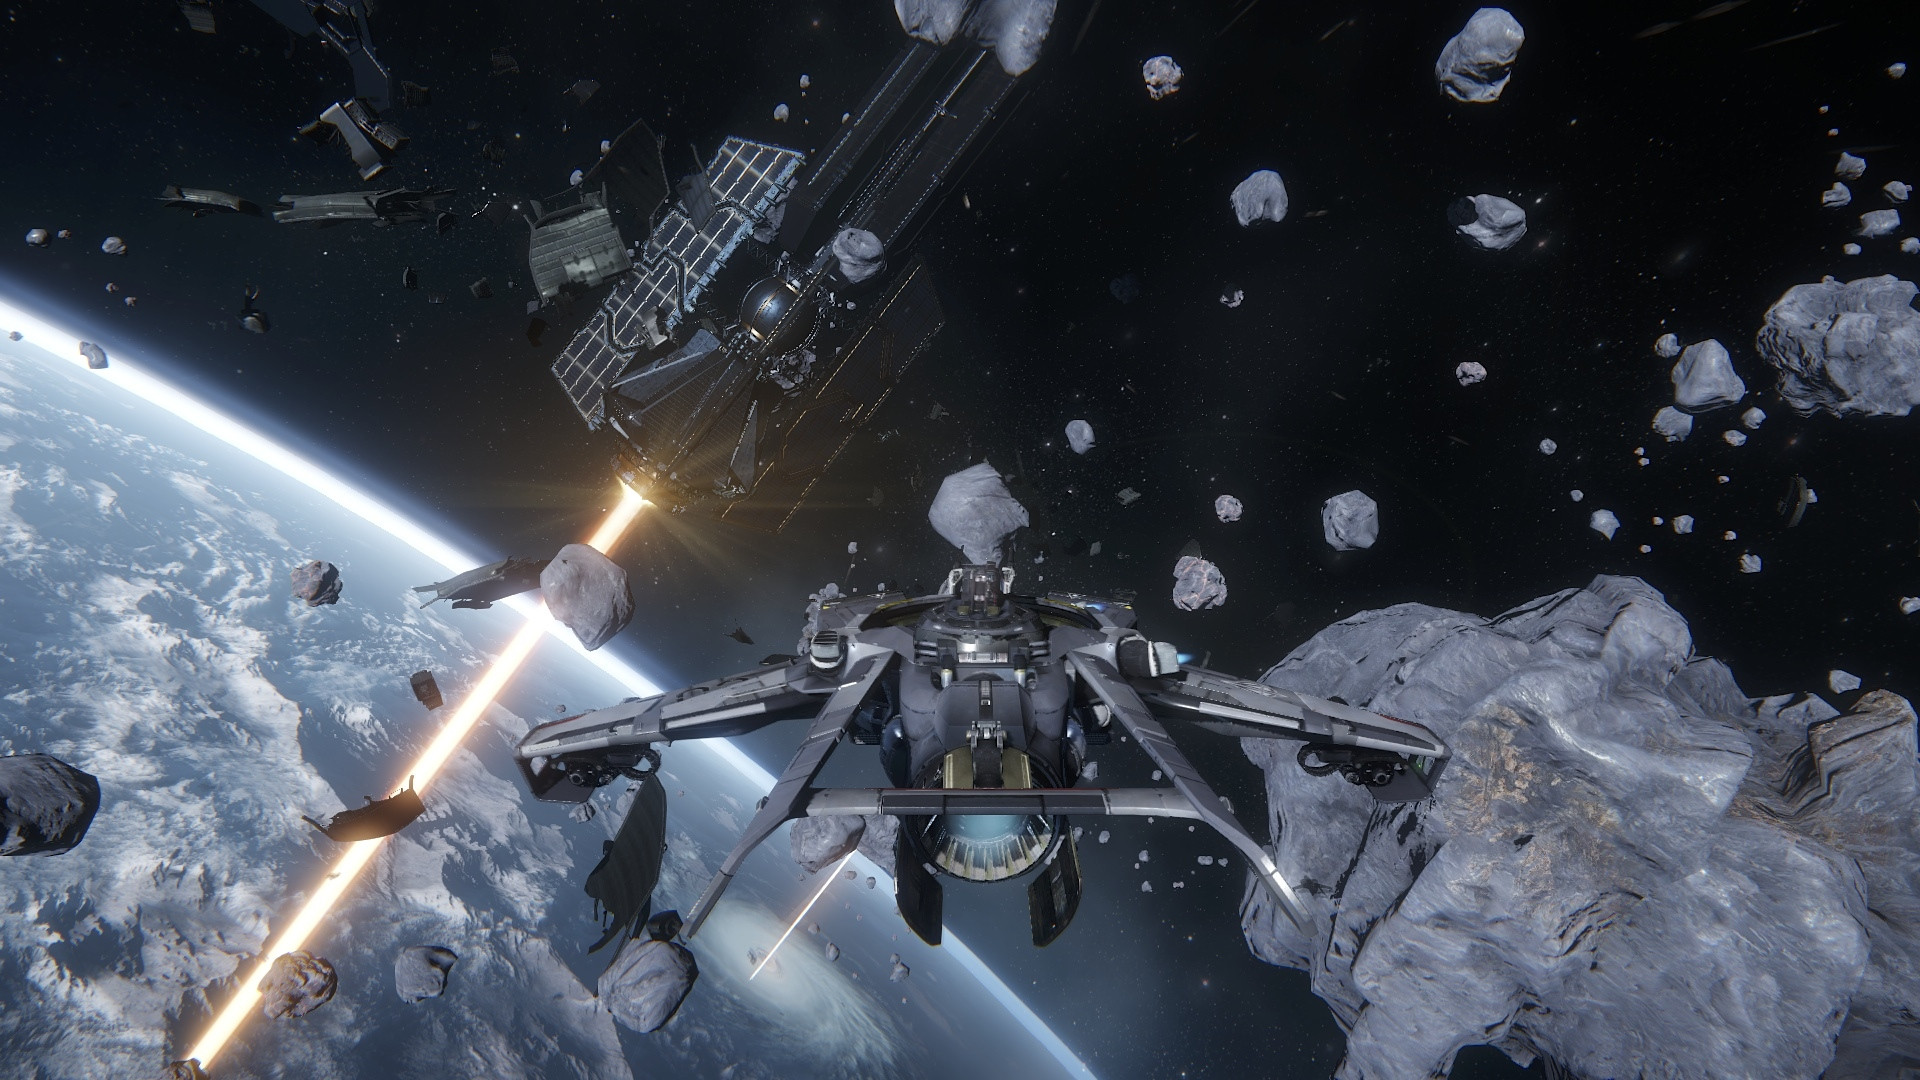 Star Citizen - The next generation of space simulations